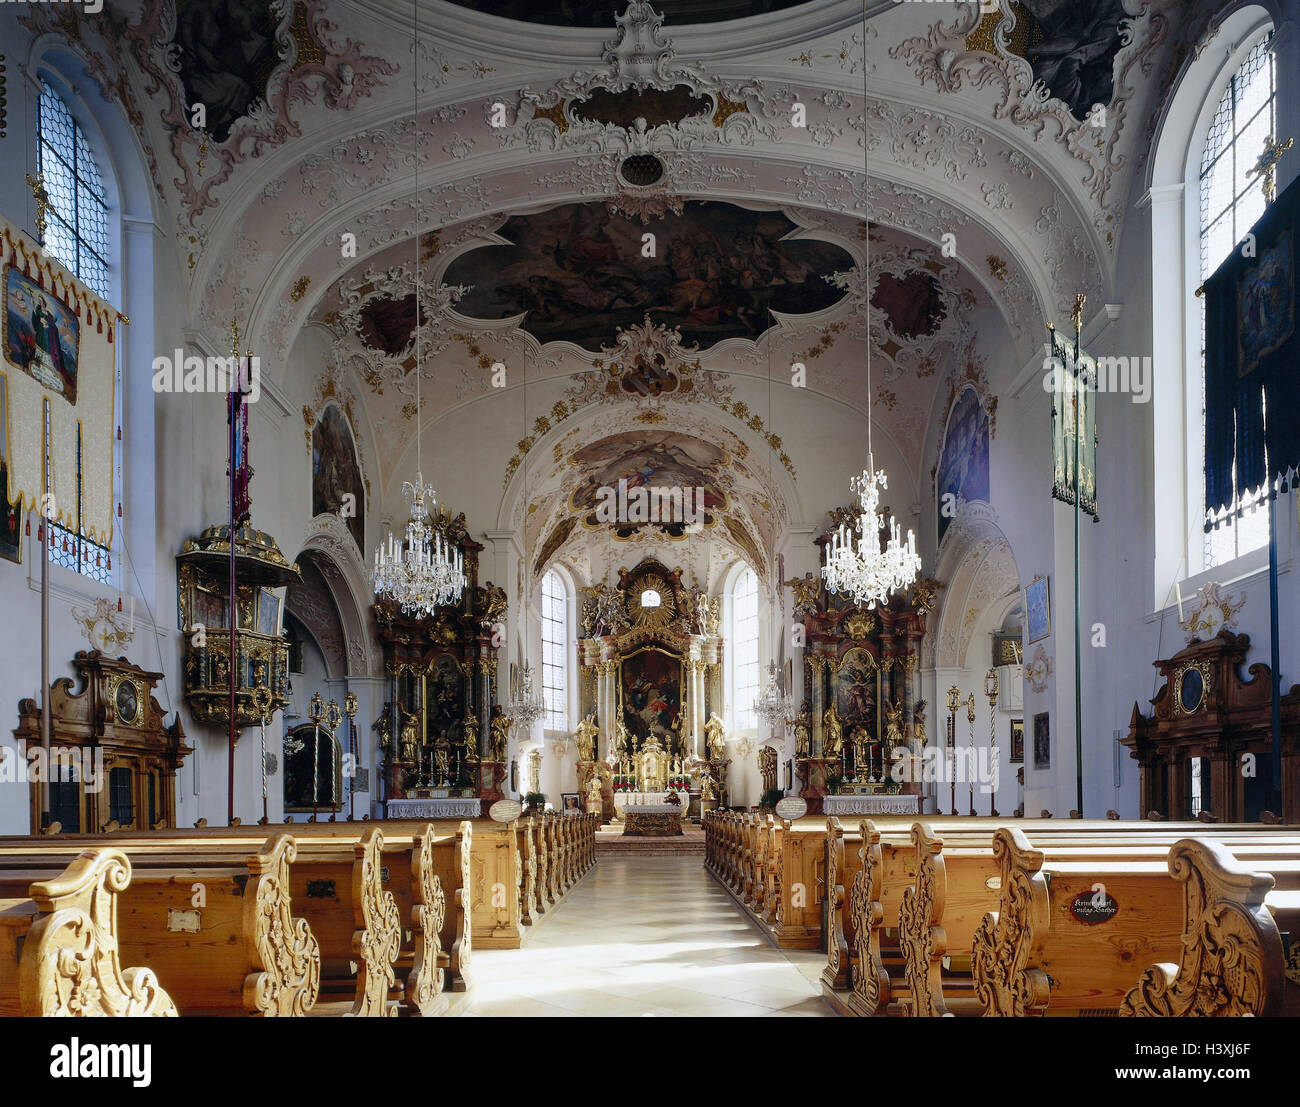 Germany, Upper Bavaria, Mittenwald, church St. Peter and Paul, interior view Bavaria, Werdenfels, violin making place, parish church, central nave, saddles, chancel, architecture, architectural style, baroque, baroque church, art, culture, place of intere Stock Photo